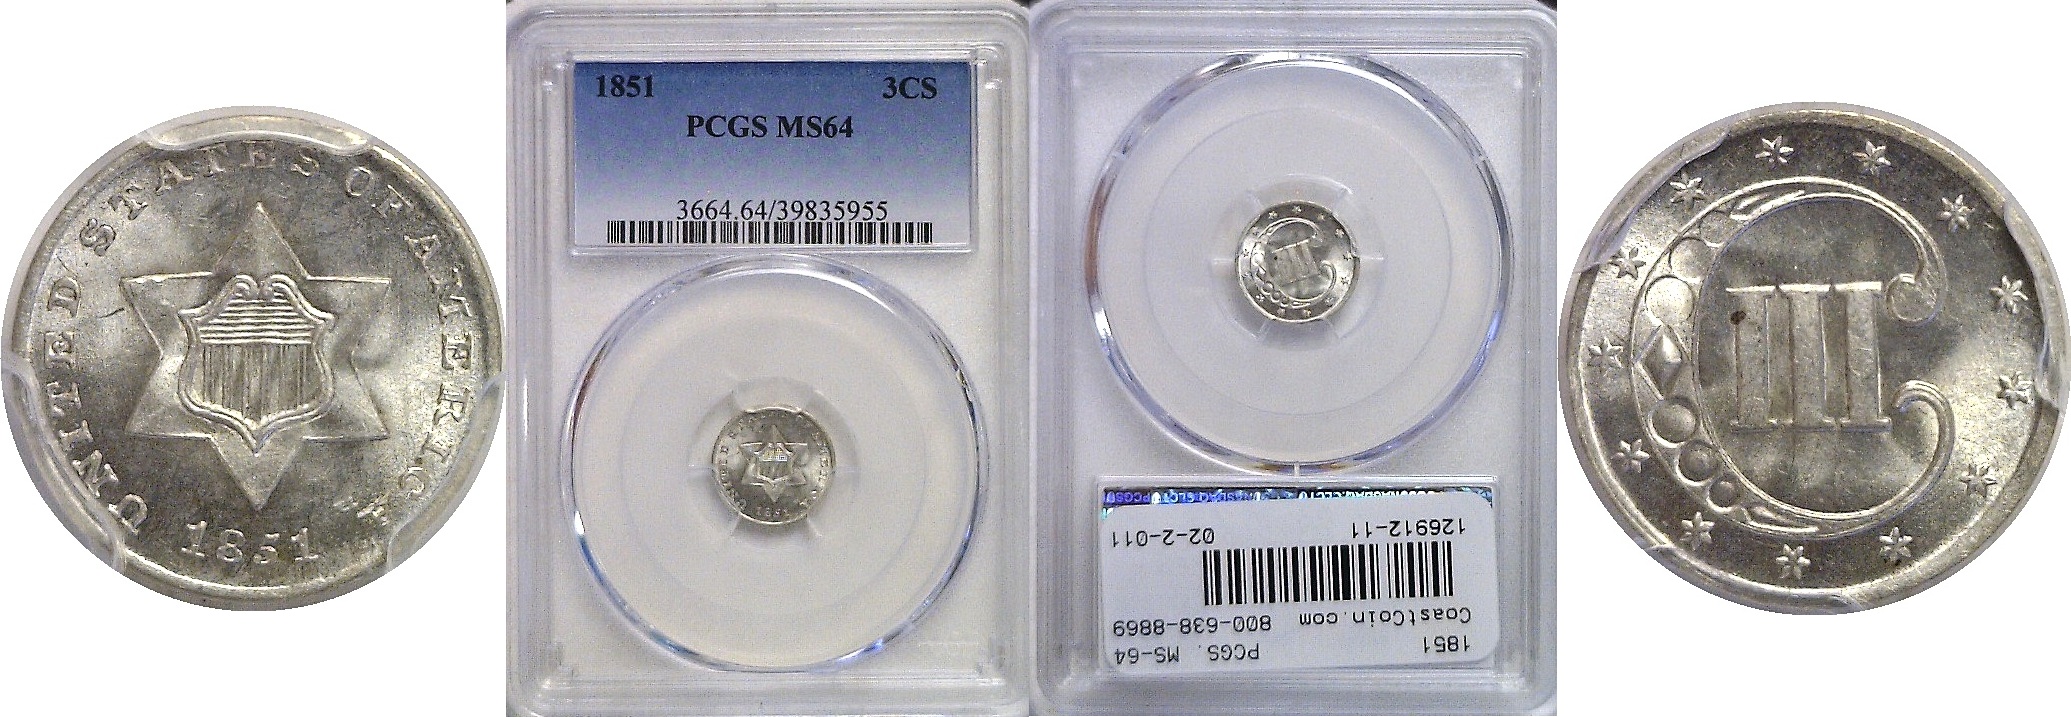 3 cent silver coins for sale